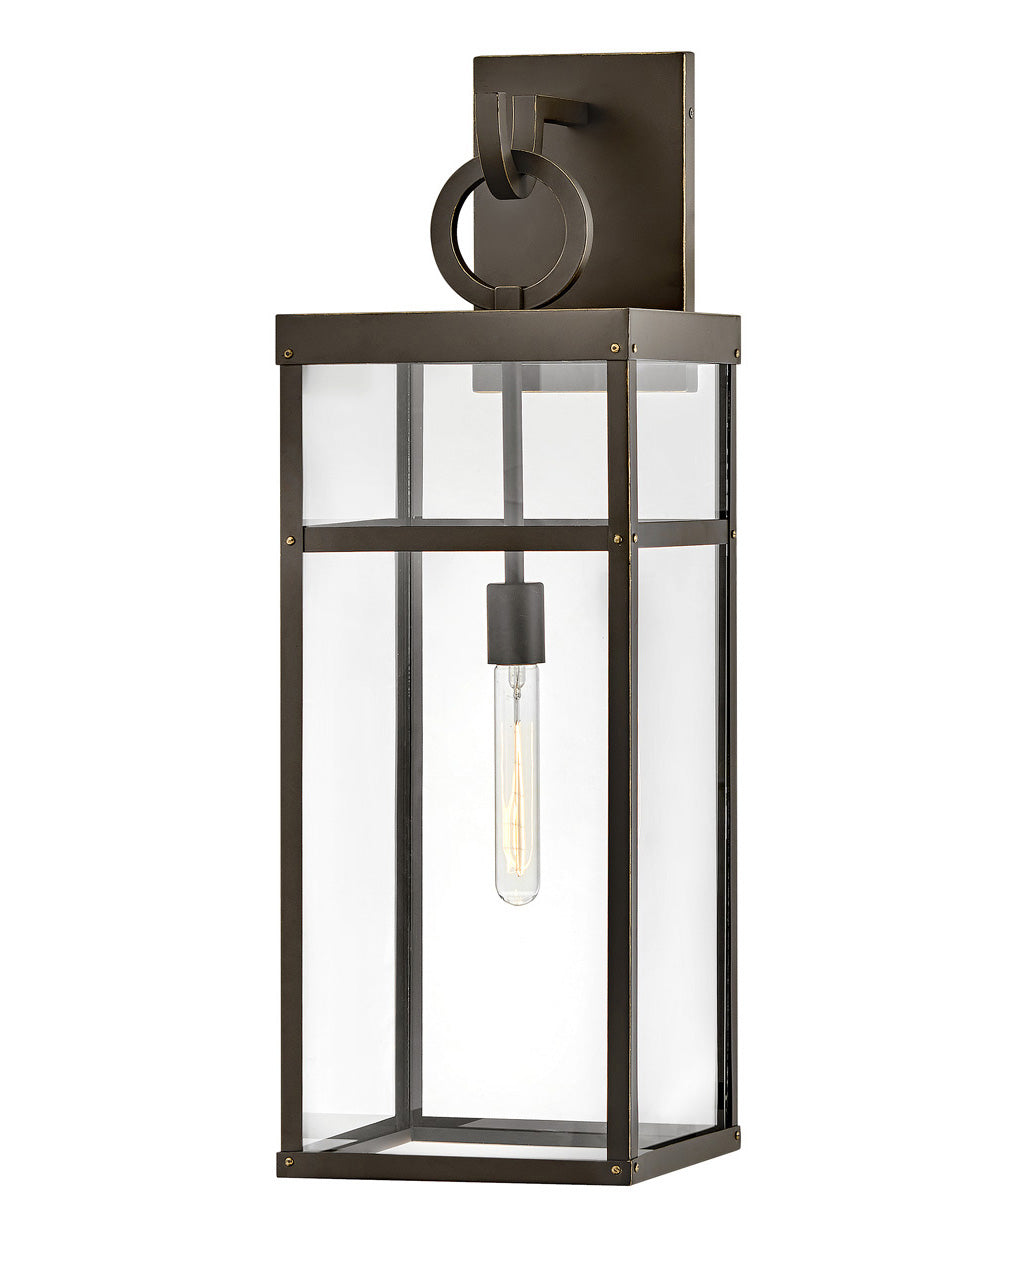 PORTER-Extra Large Wall Mount Lantern Outdoor l Wall Hinkley   